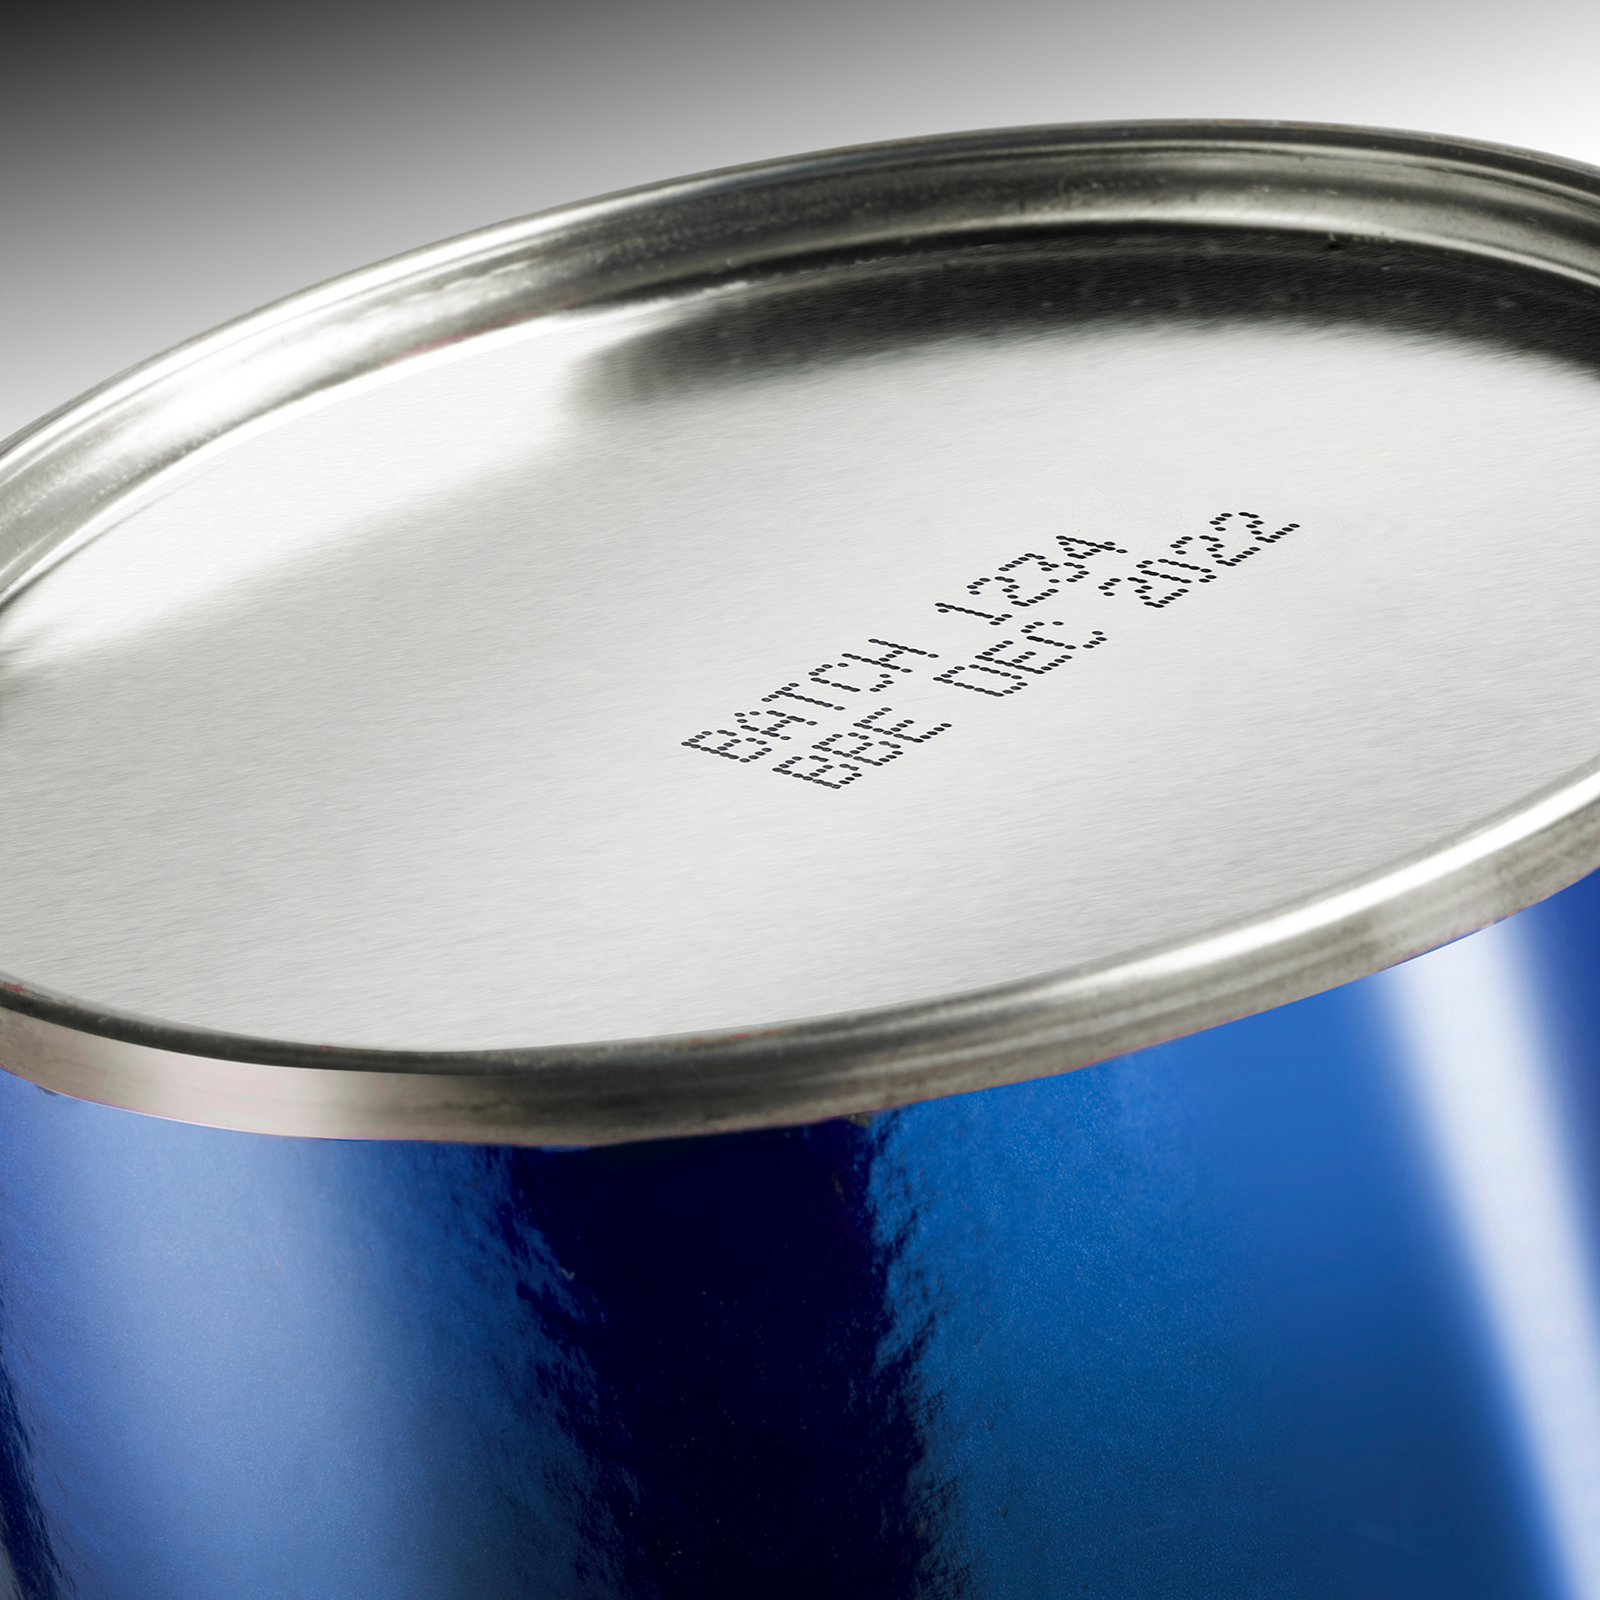 Metal can printed with date and batch codes using the automatic portable linx 10 coder